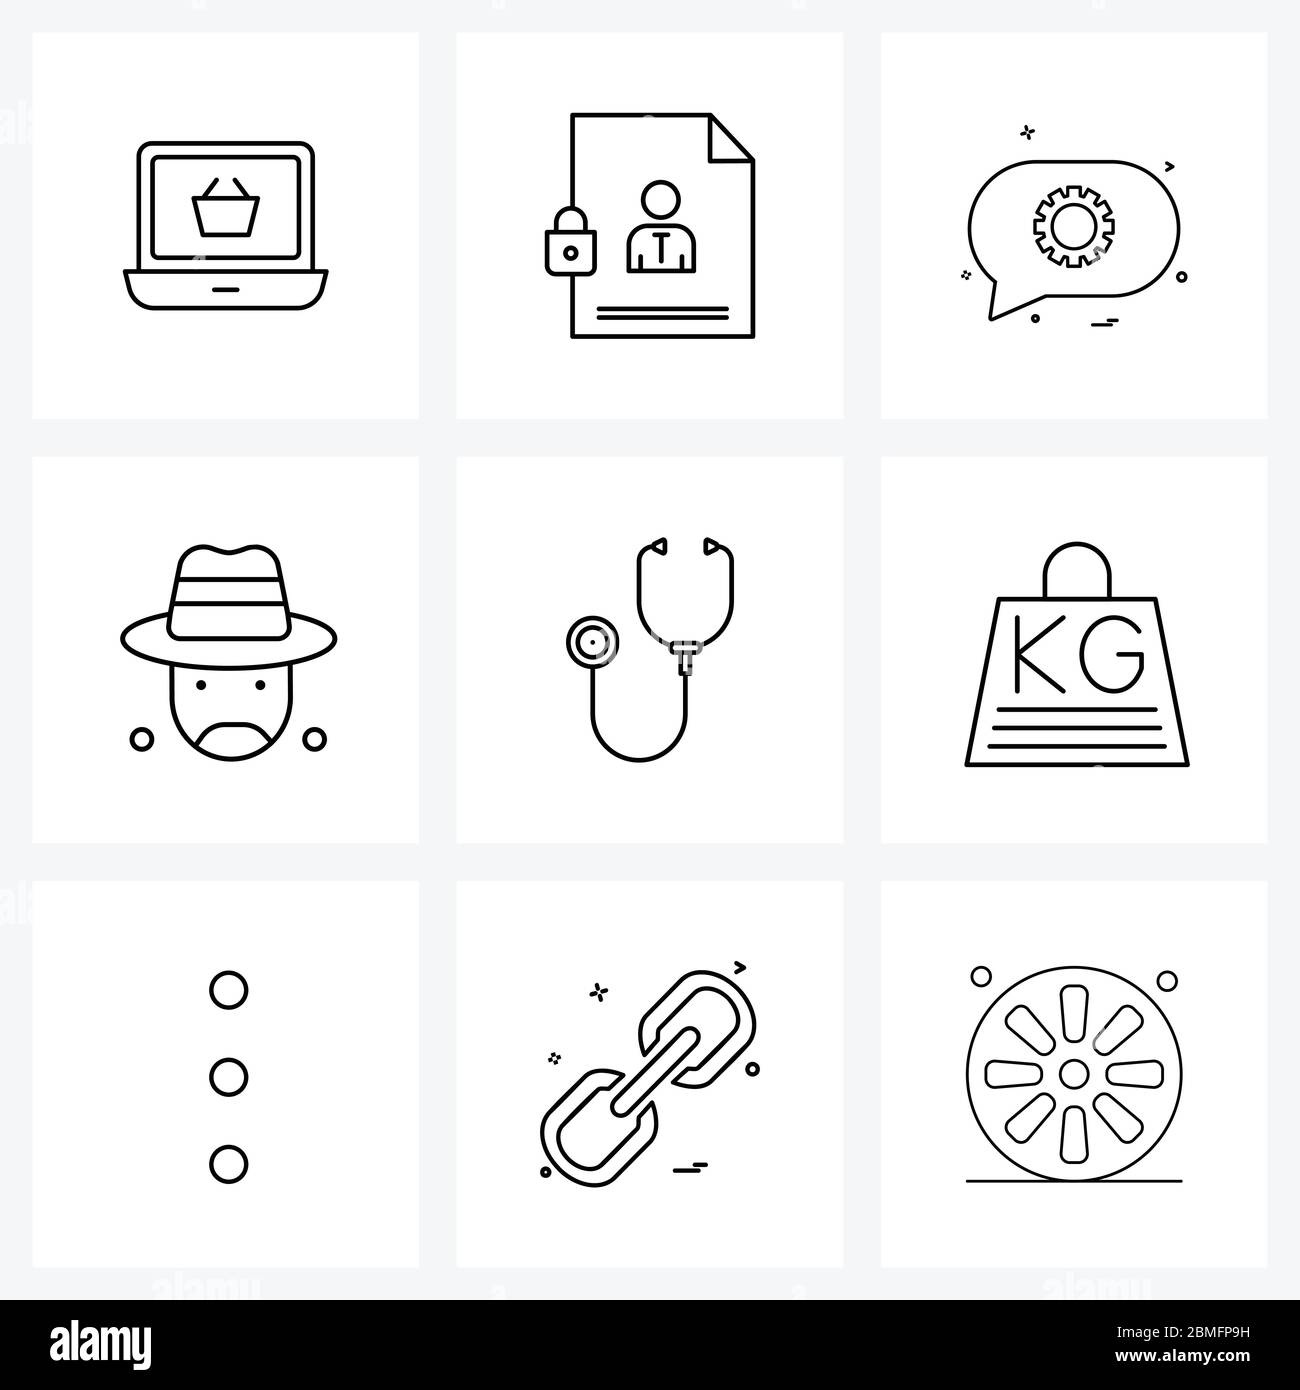 9 Editable Vector Line Icons and Modern Symbols of medical, prisoner, labour, detainee, convict Vector Illustration Stock Vector